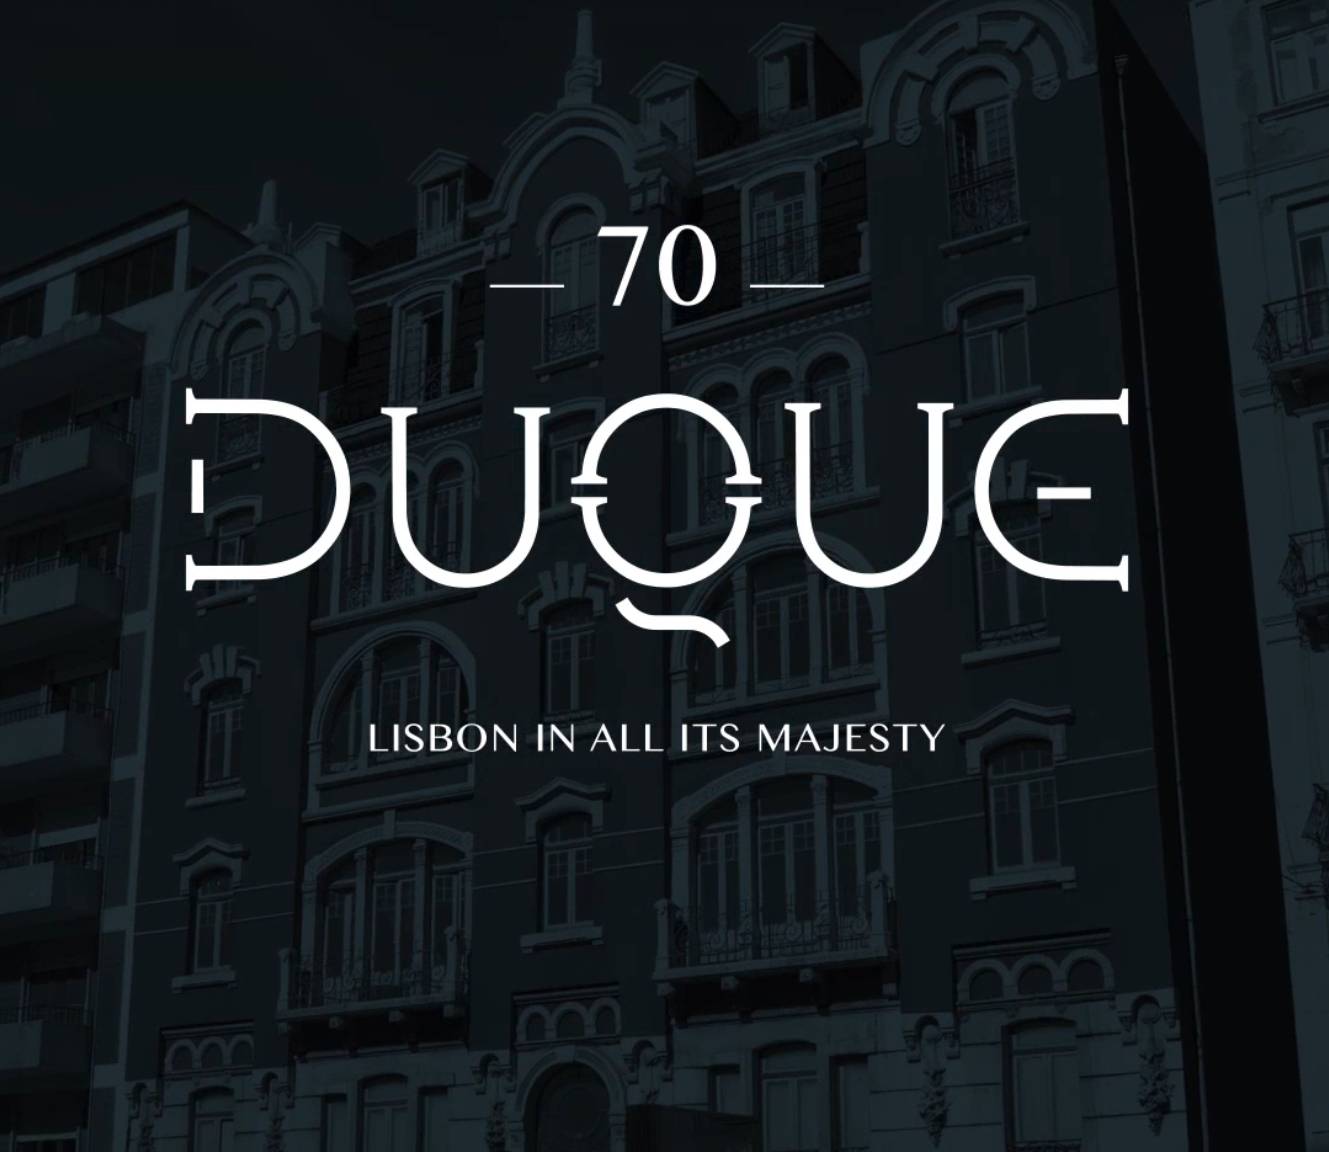 Duque 70, Lisbon in all it’s majesty.